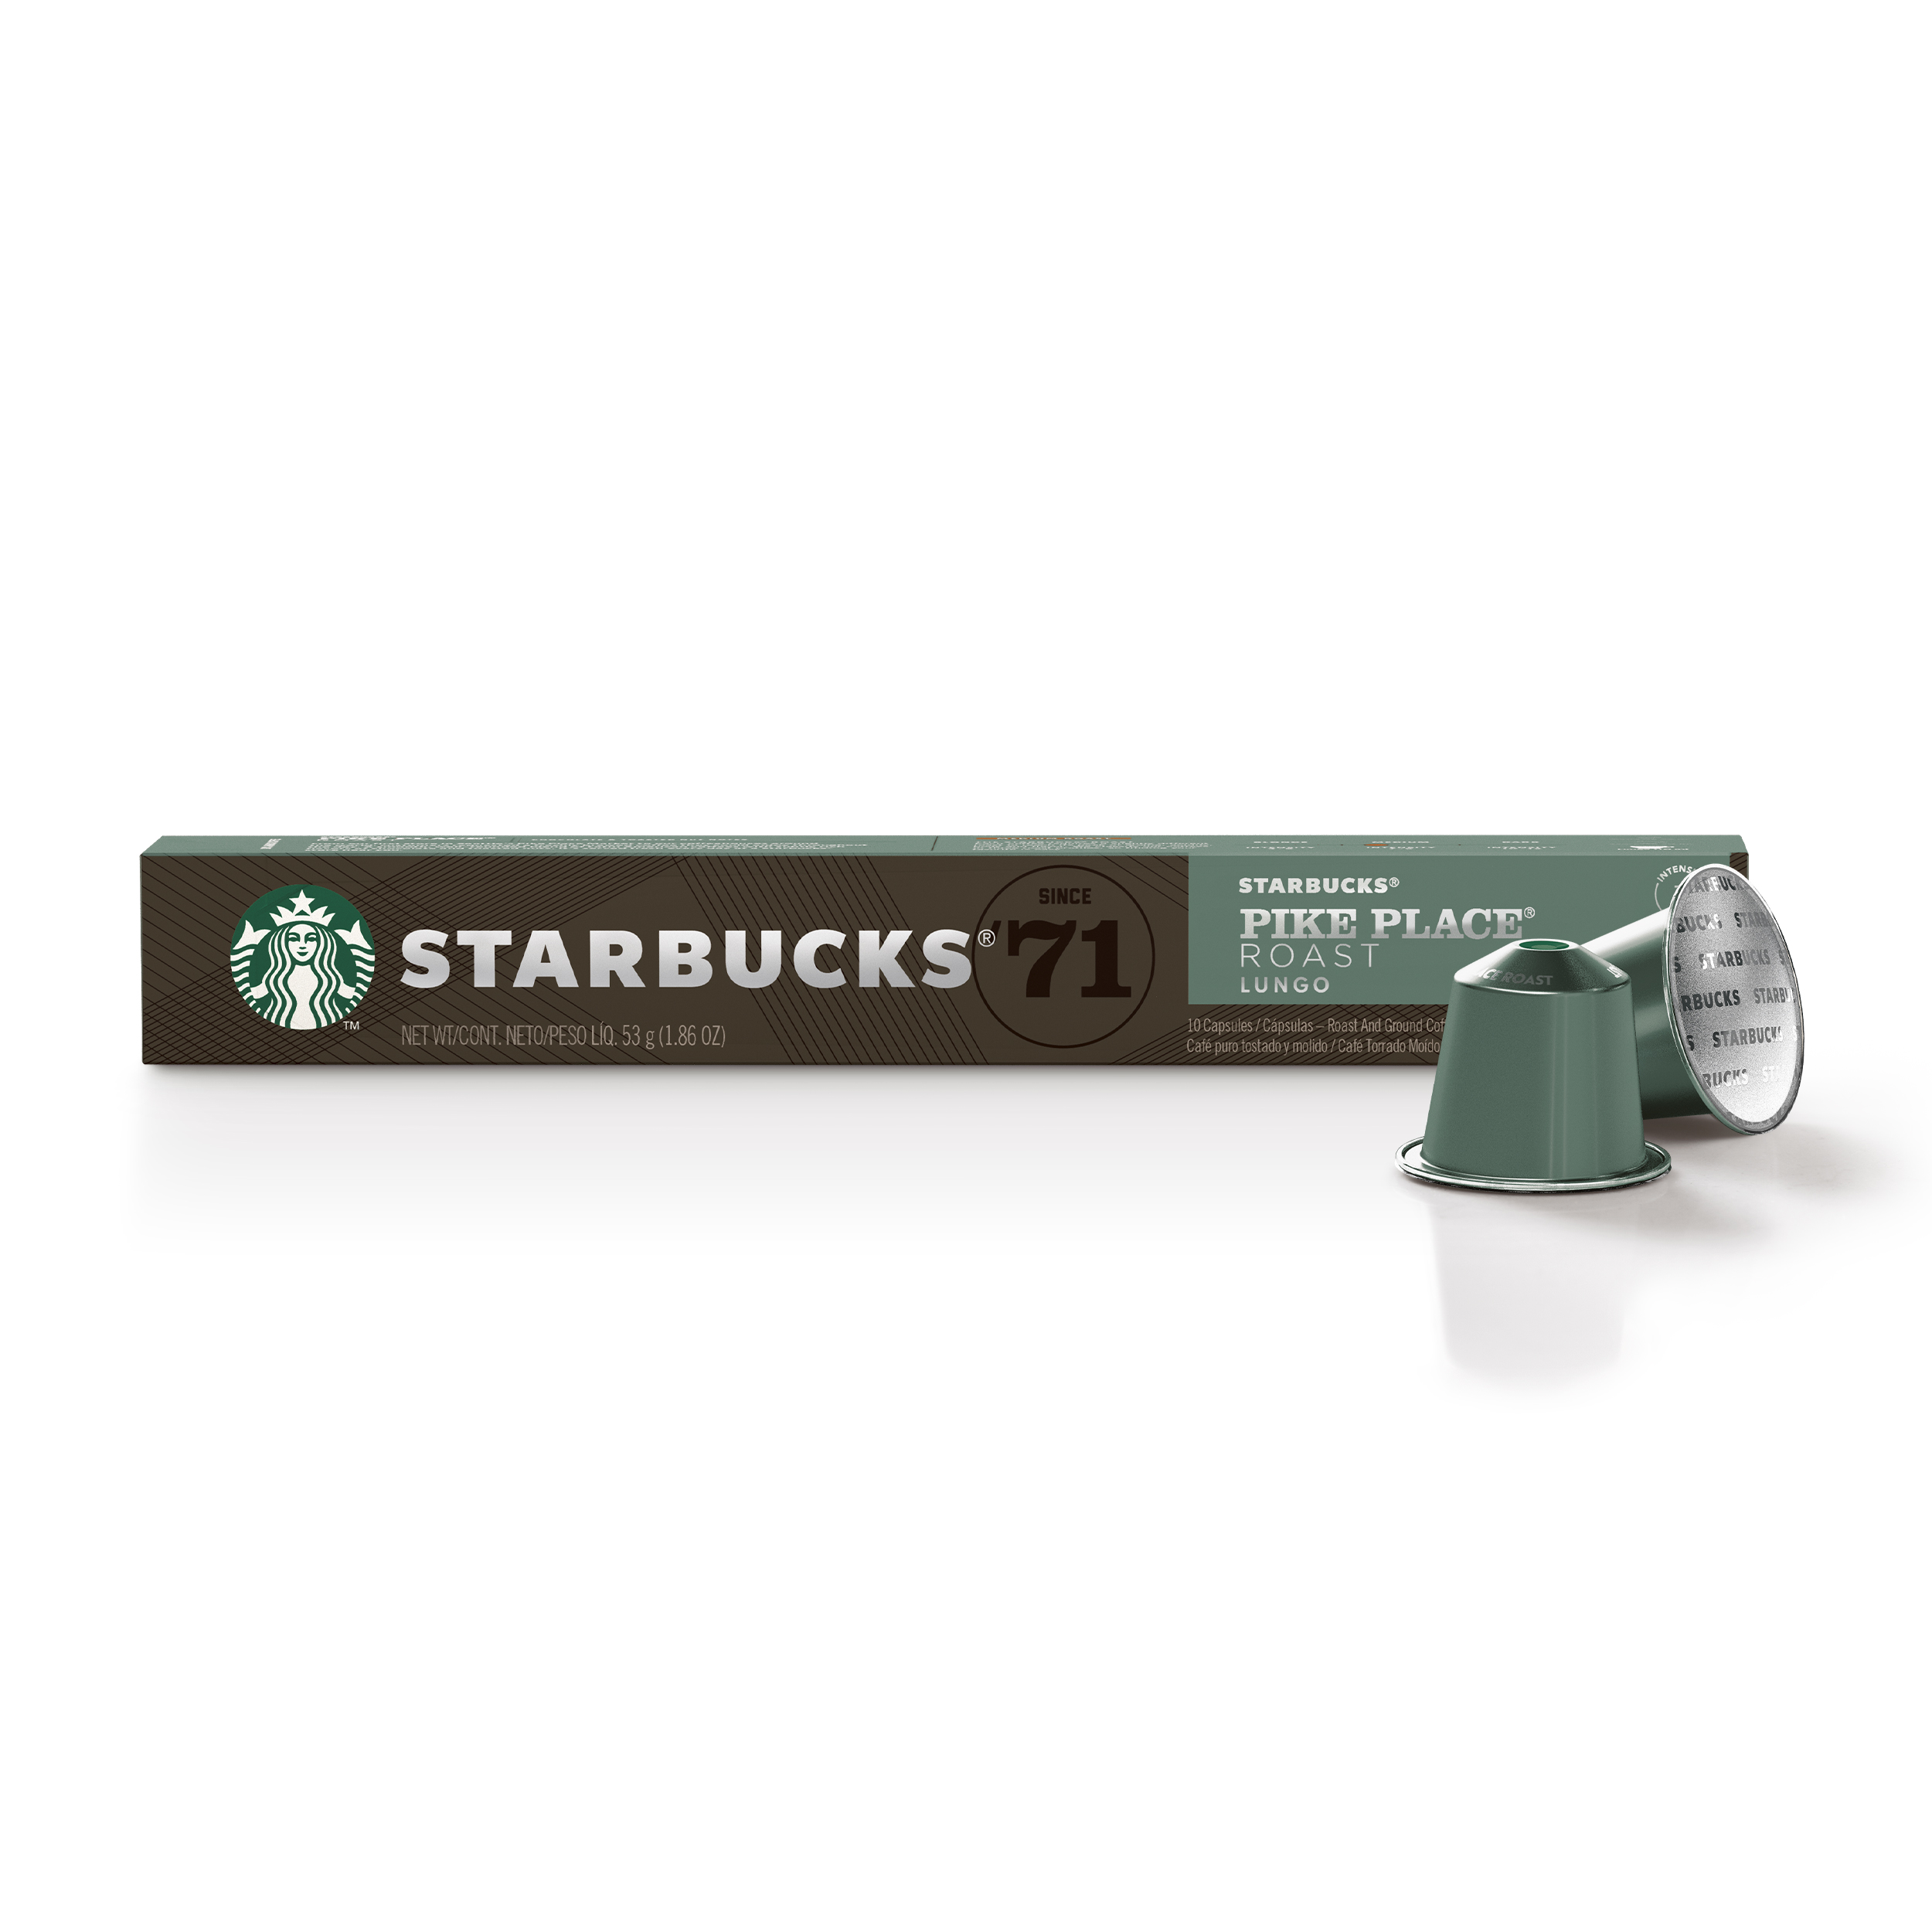 Starbucks by Nespresso Pike Place Roast (10-count single serve capsules compatible with Nespresso Original Line System) - image 1 of 8